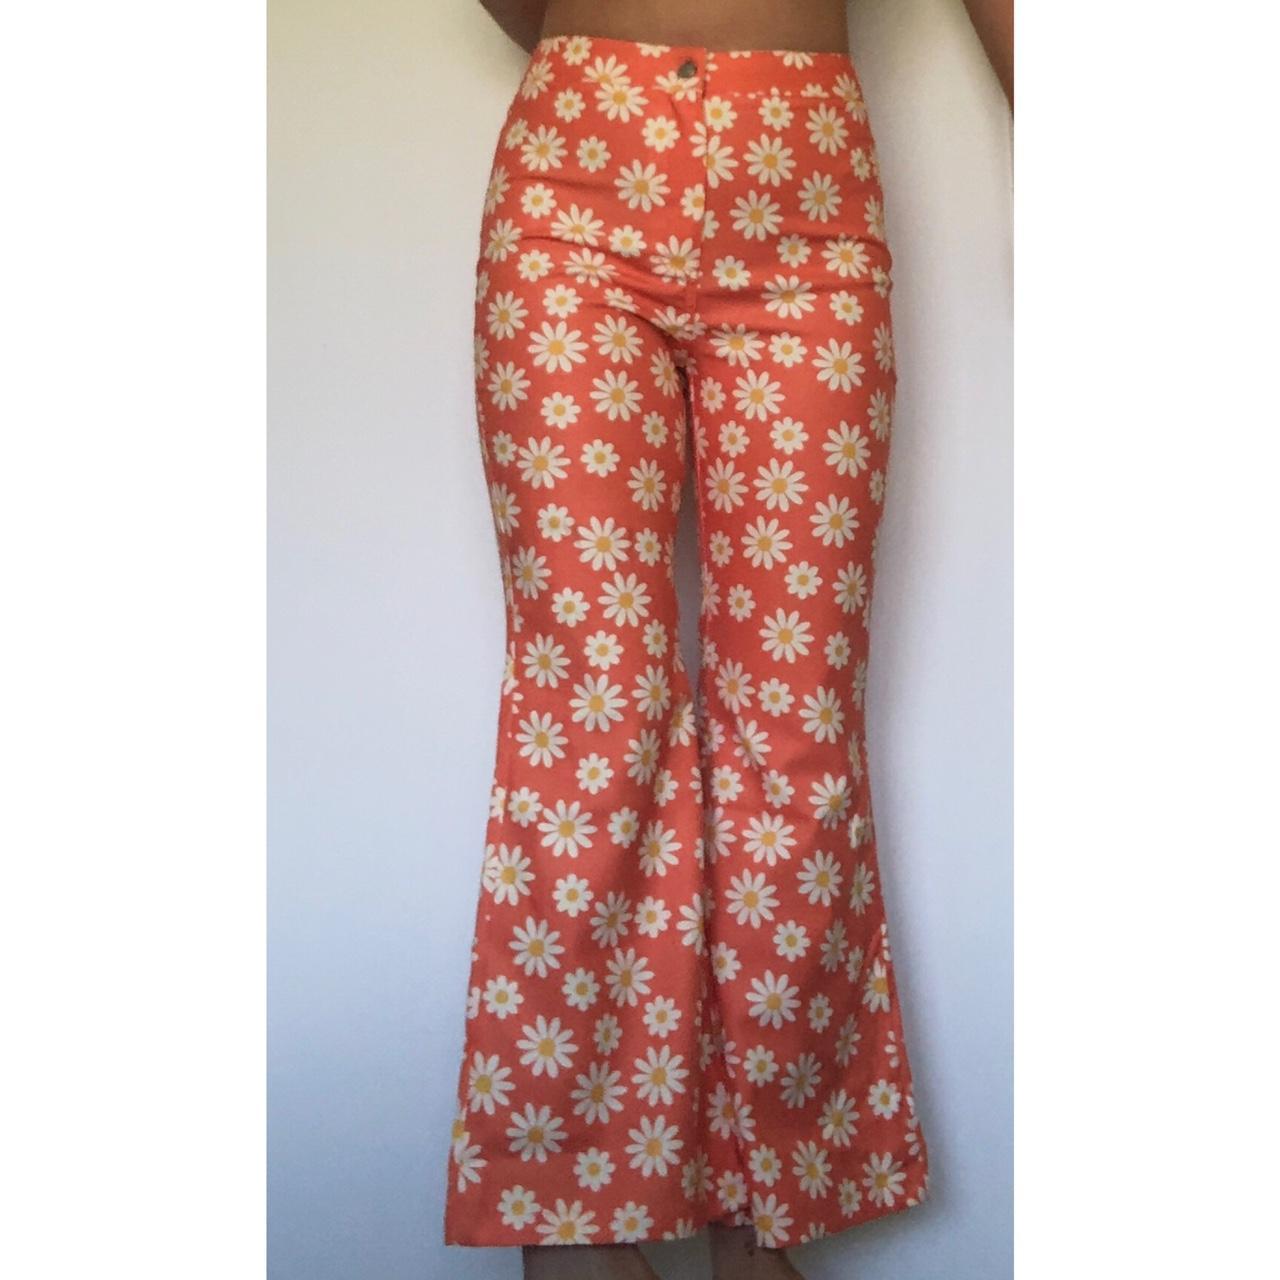 Very funky orange and daisy print flare pants. Have... - Depop